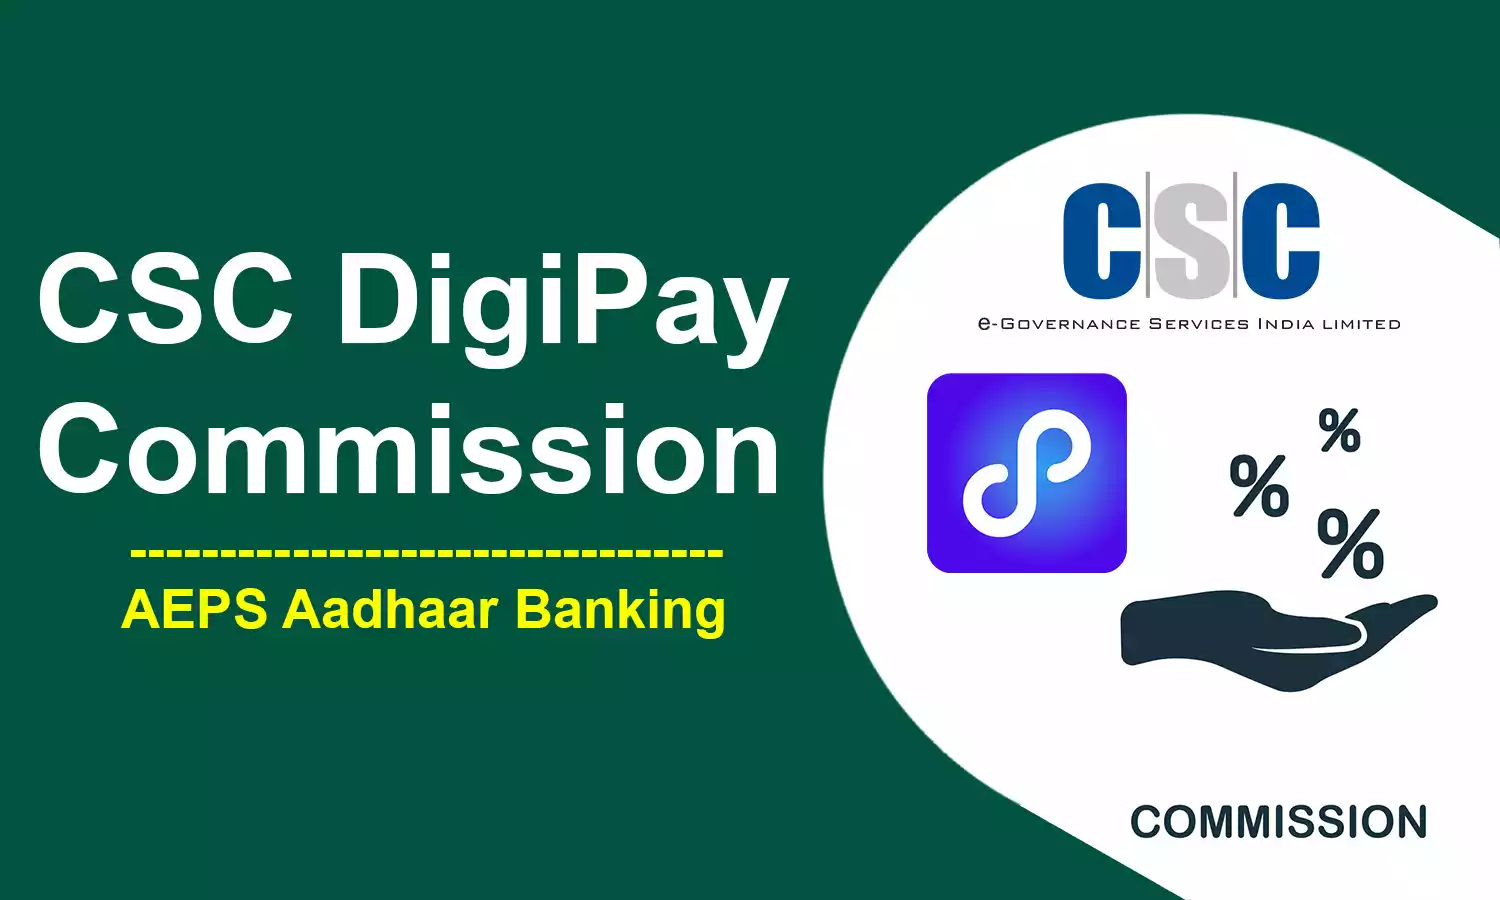 CSC DigiPay Commission